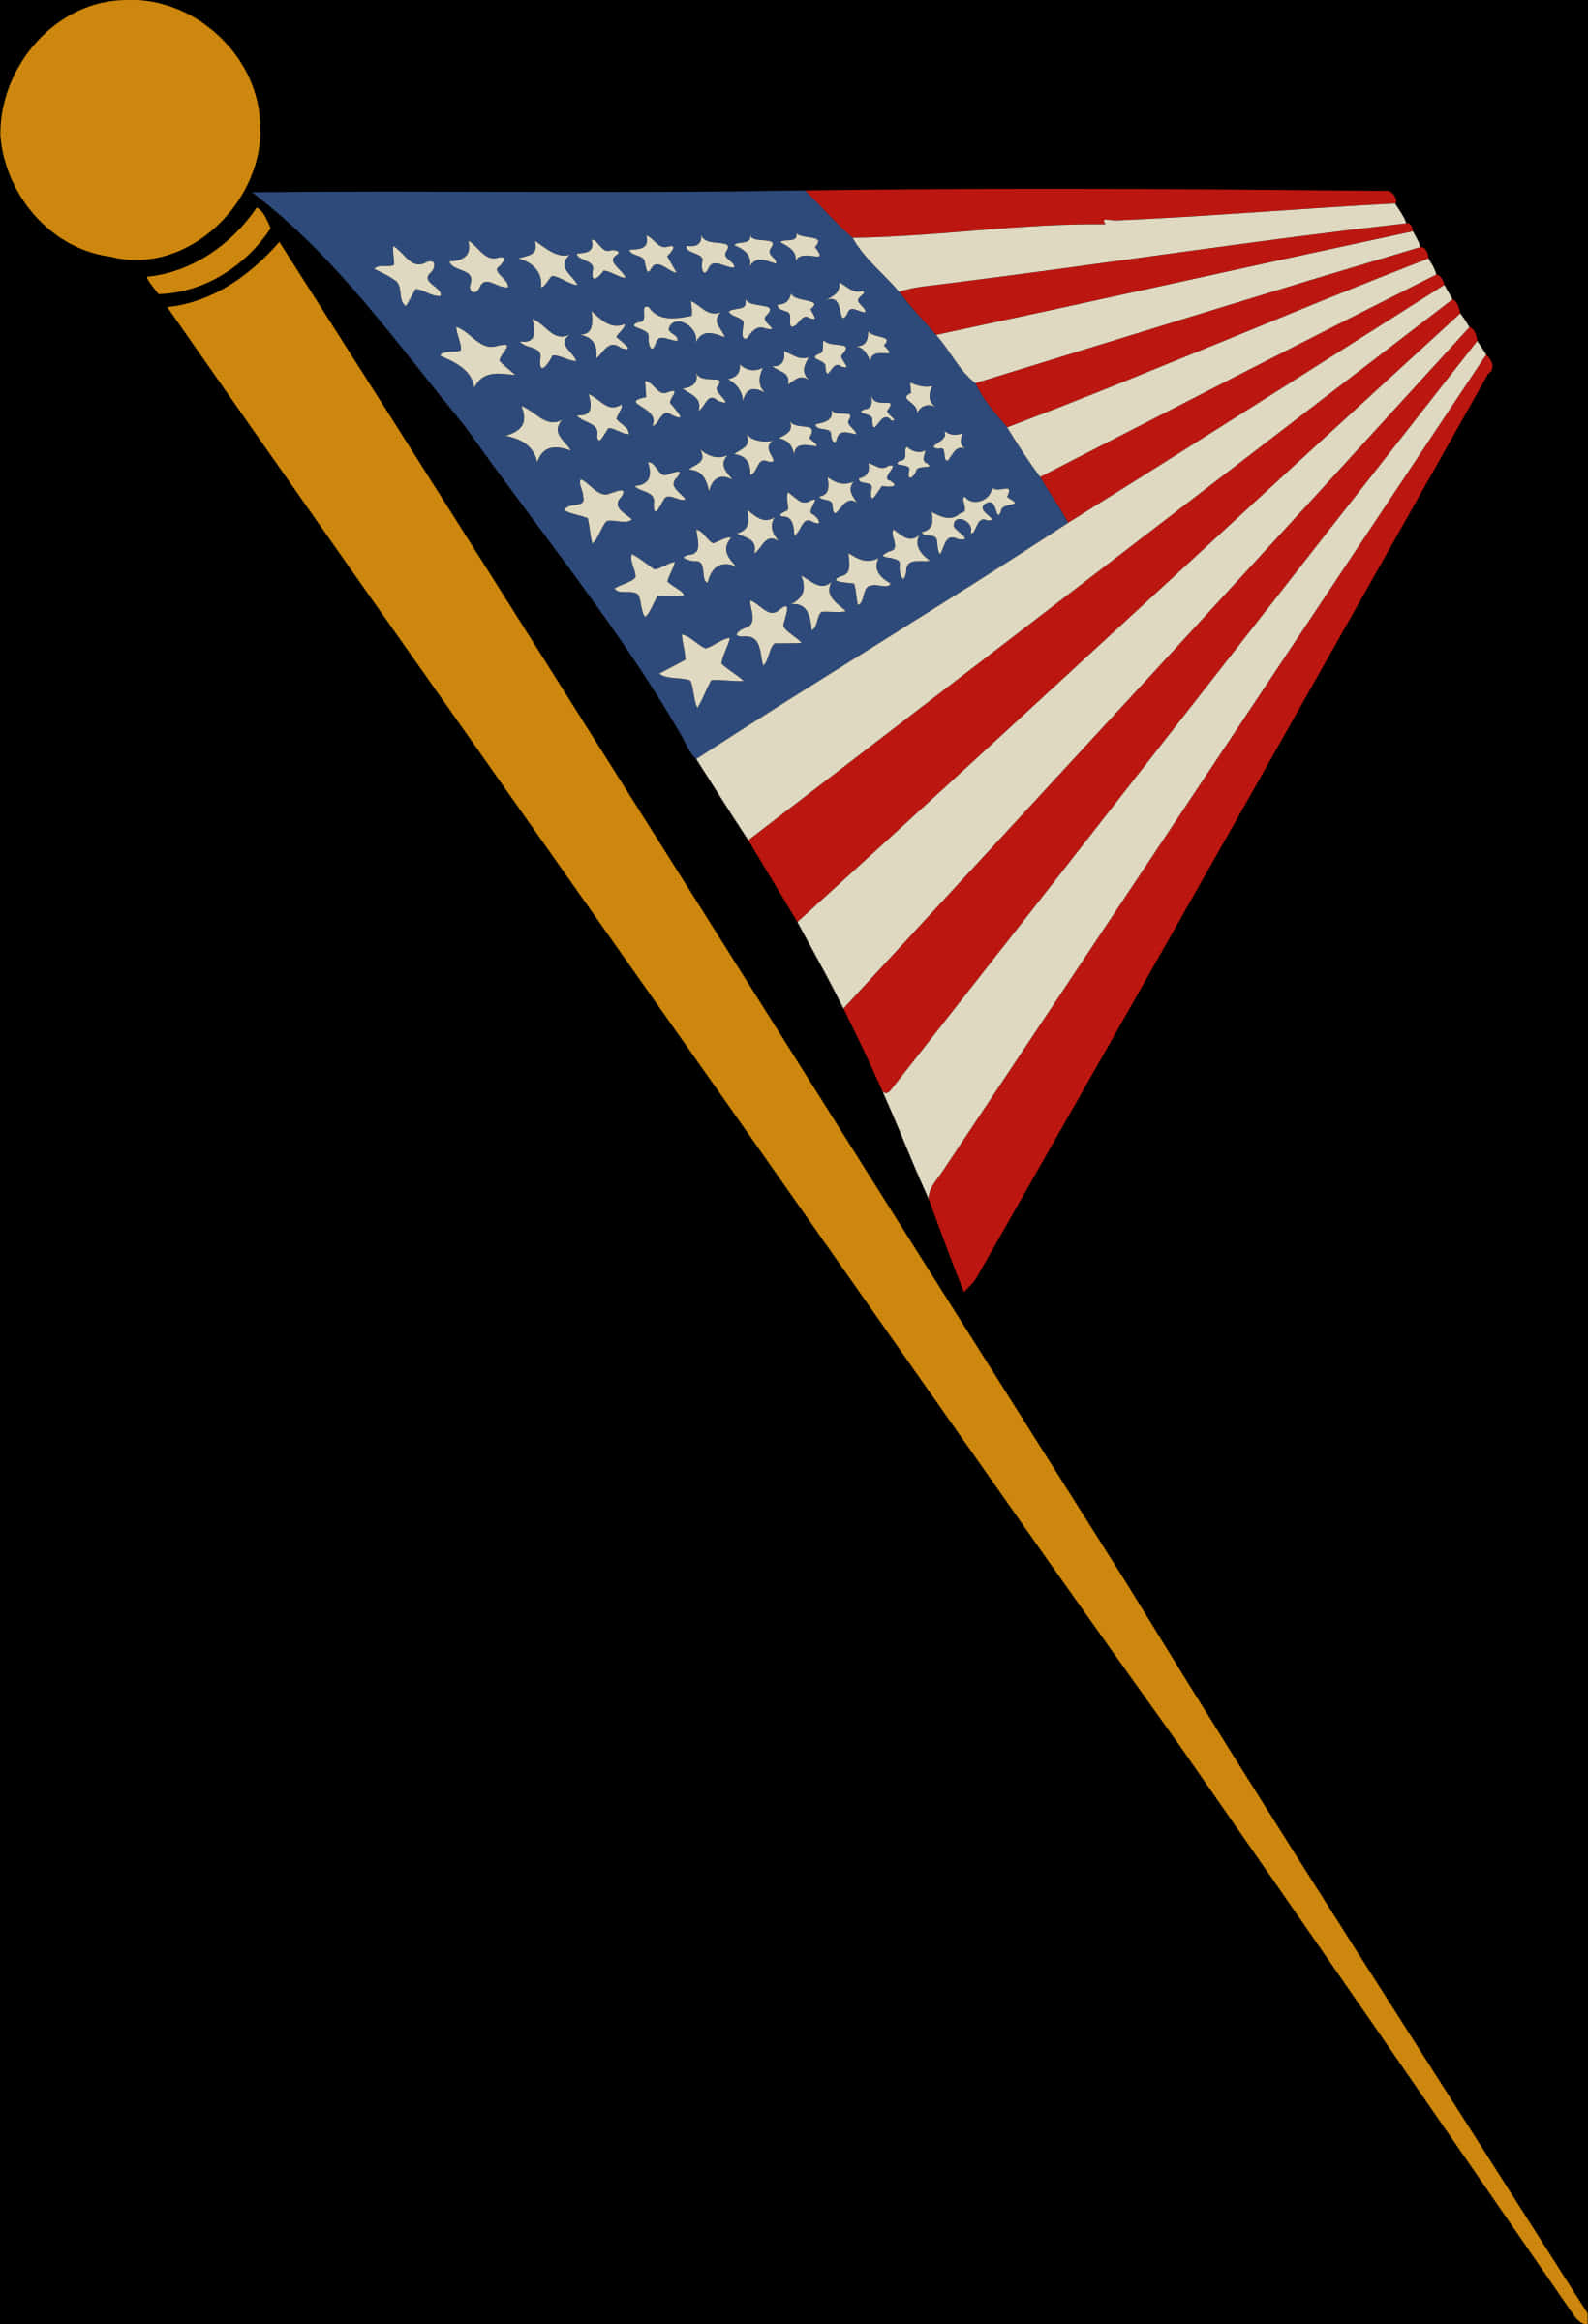 A Flag With Stars And Stripes On It